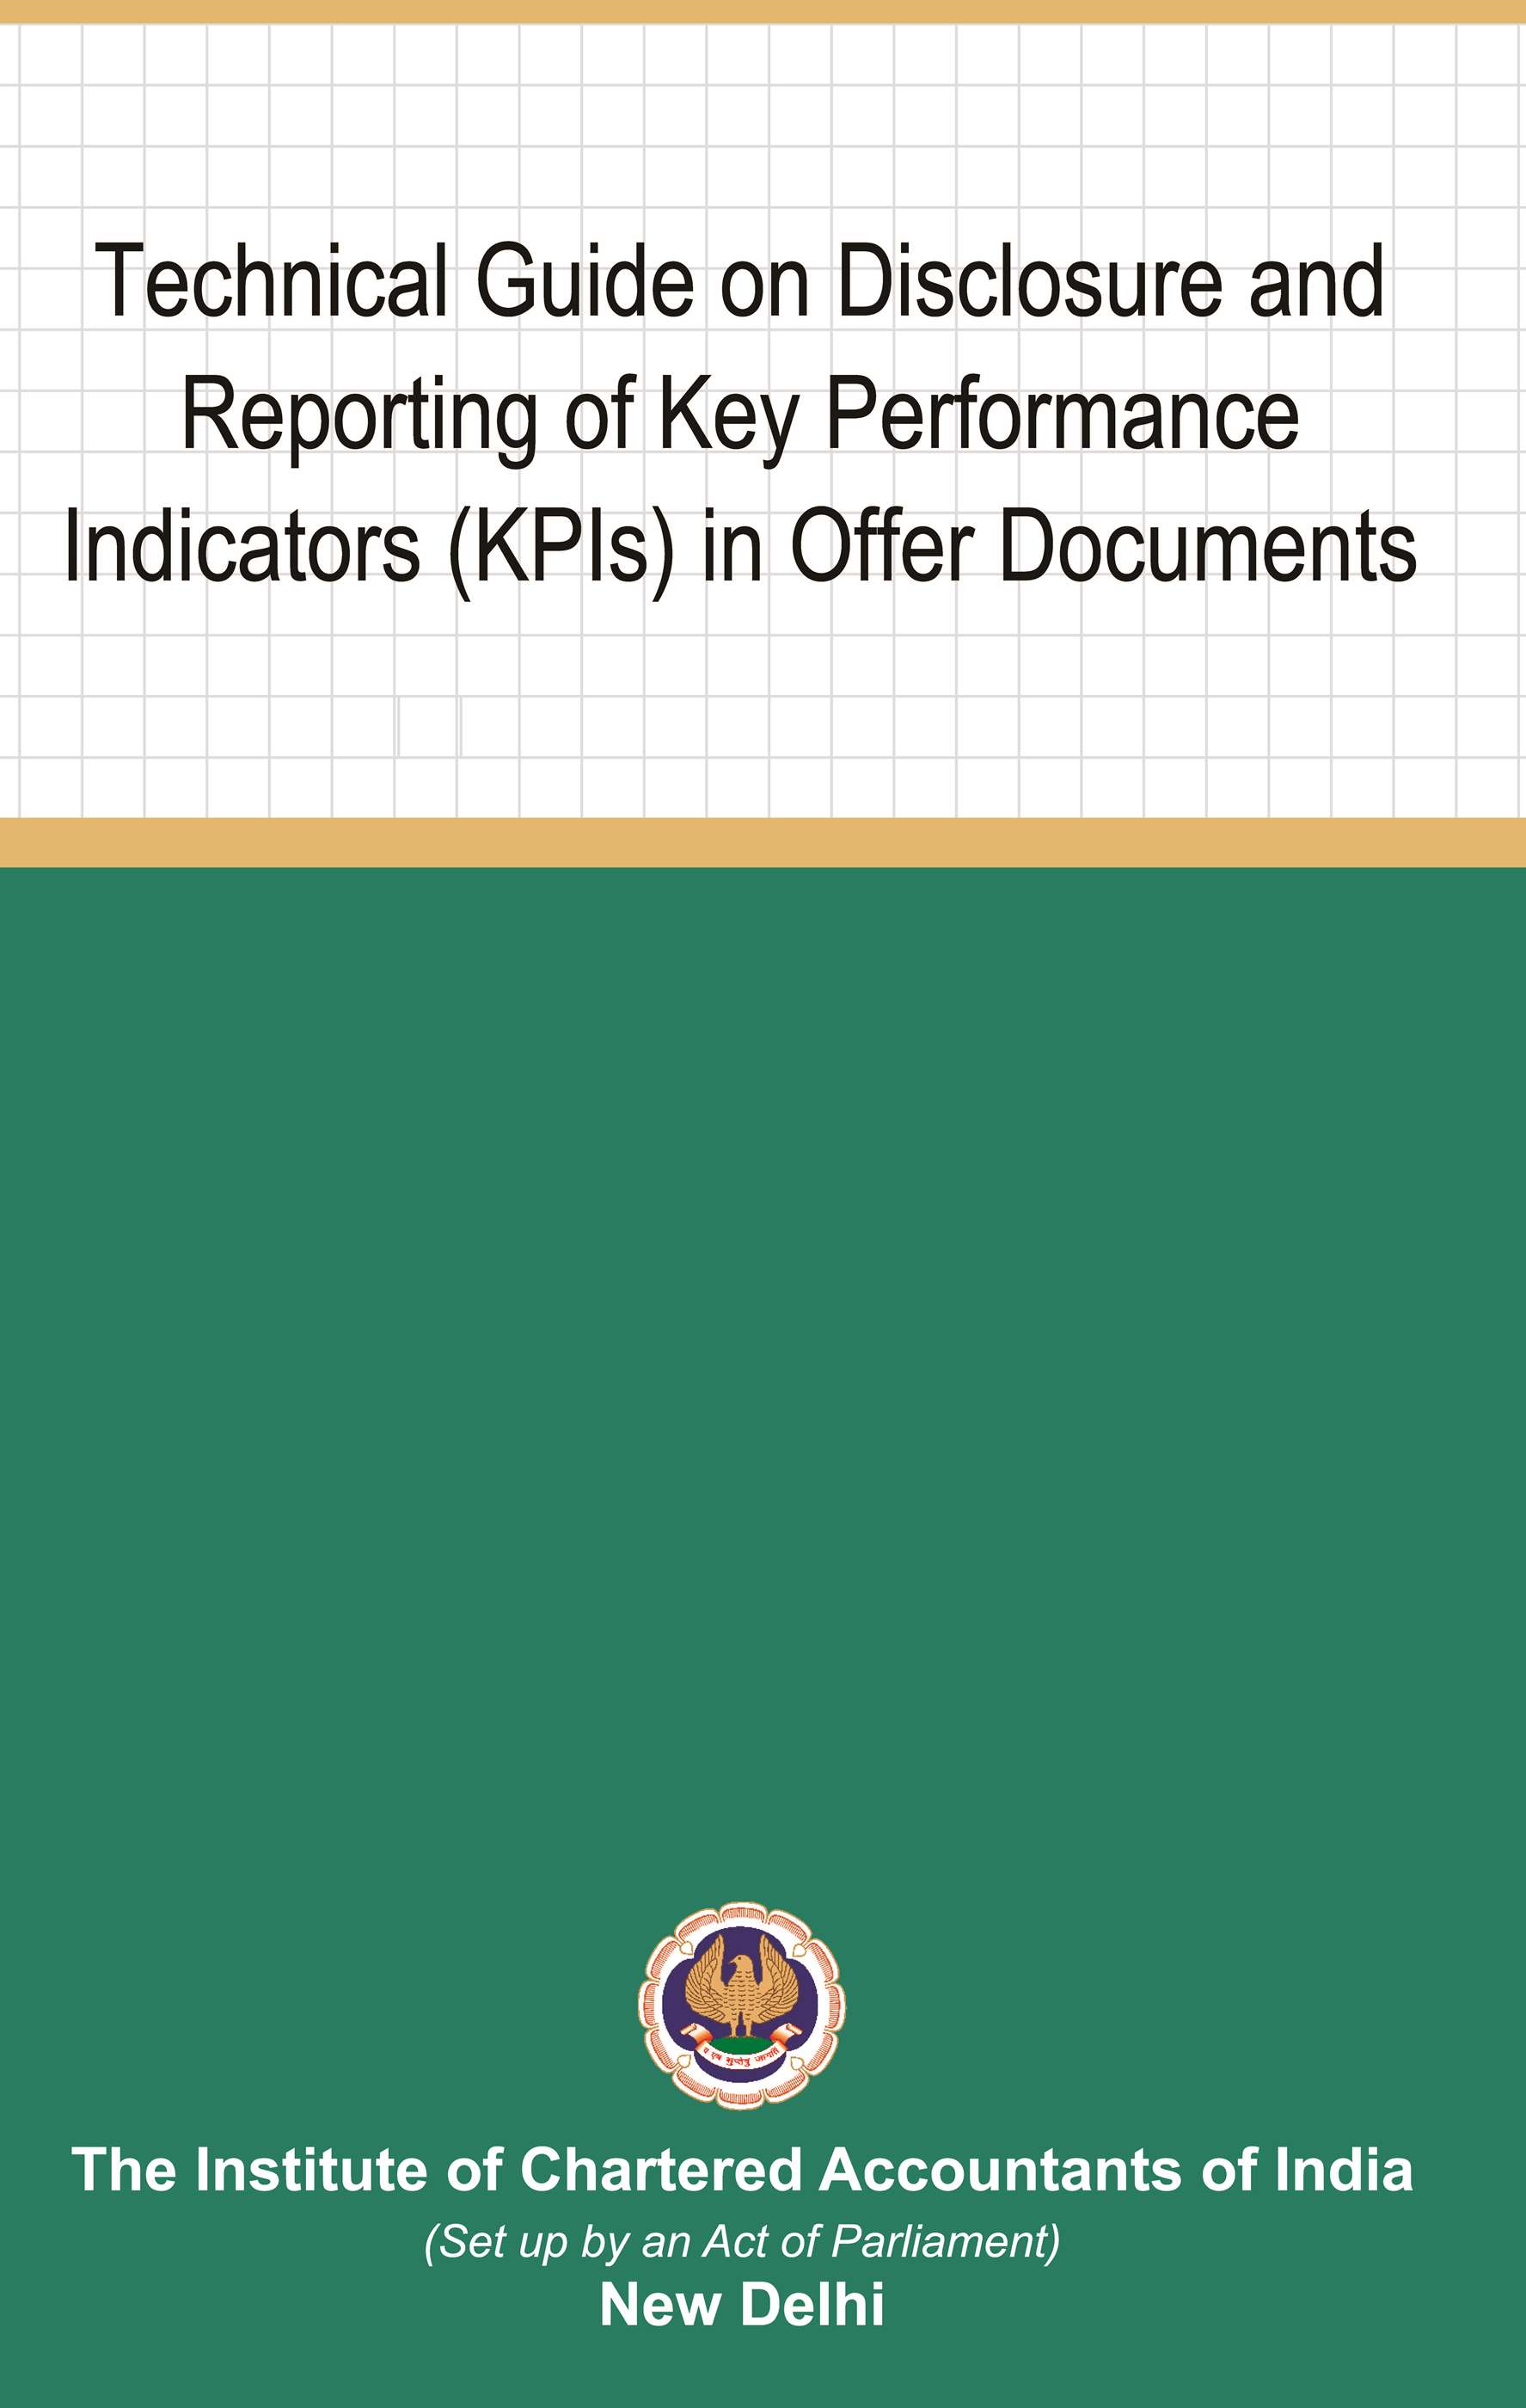 Technical Guide on Disclosure and Reporting of Key Performance Indicators (KPIs) in Offer Documents (April, 2023)